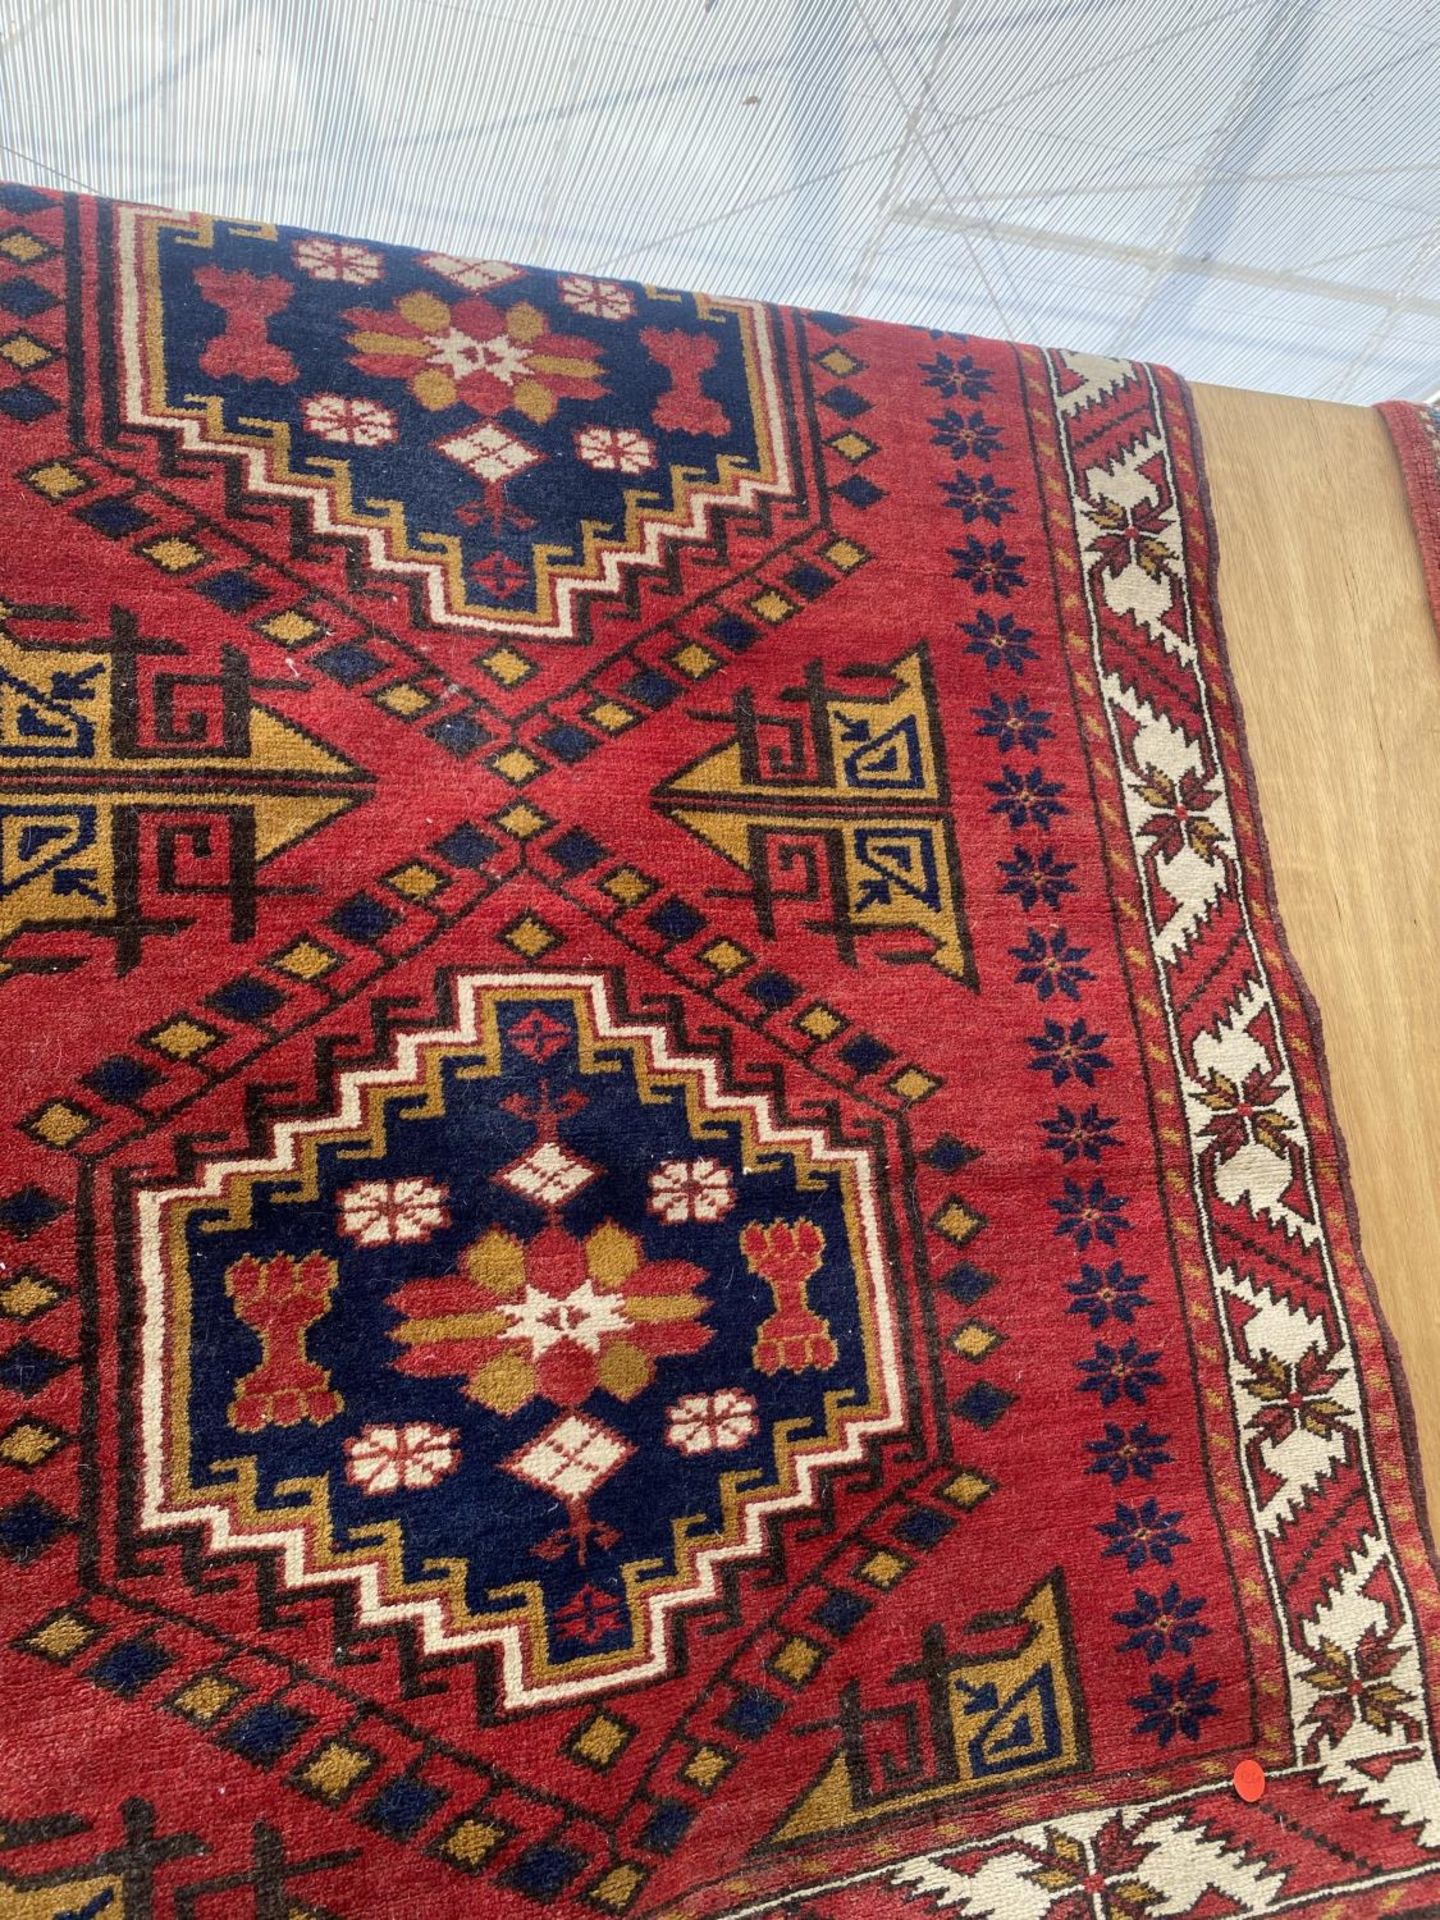 A RED PATTERNED RUG - Image 3 of 4